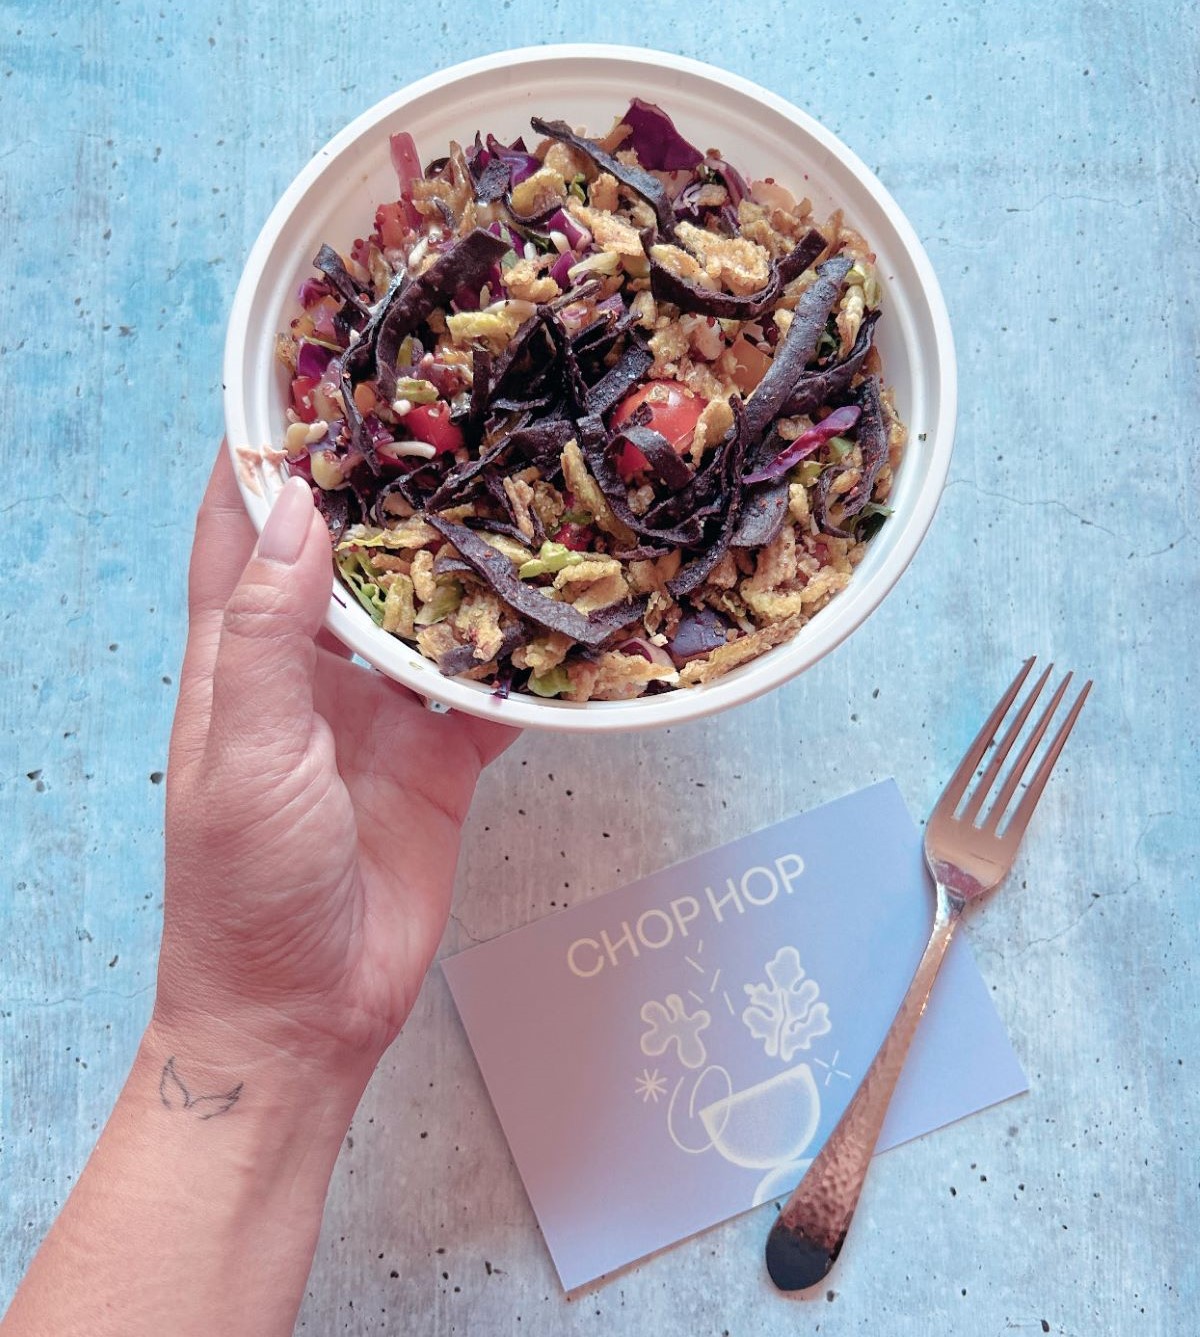 Chop Hop + Pantry is a fresh approach to healthier fast food options in North Toronto